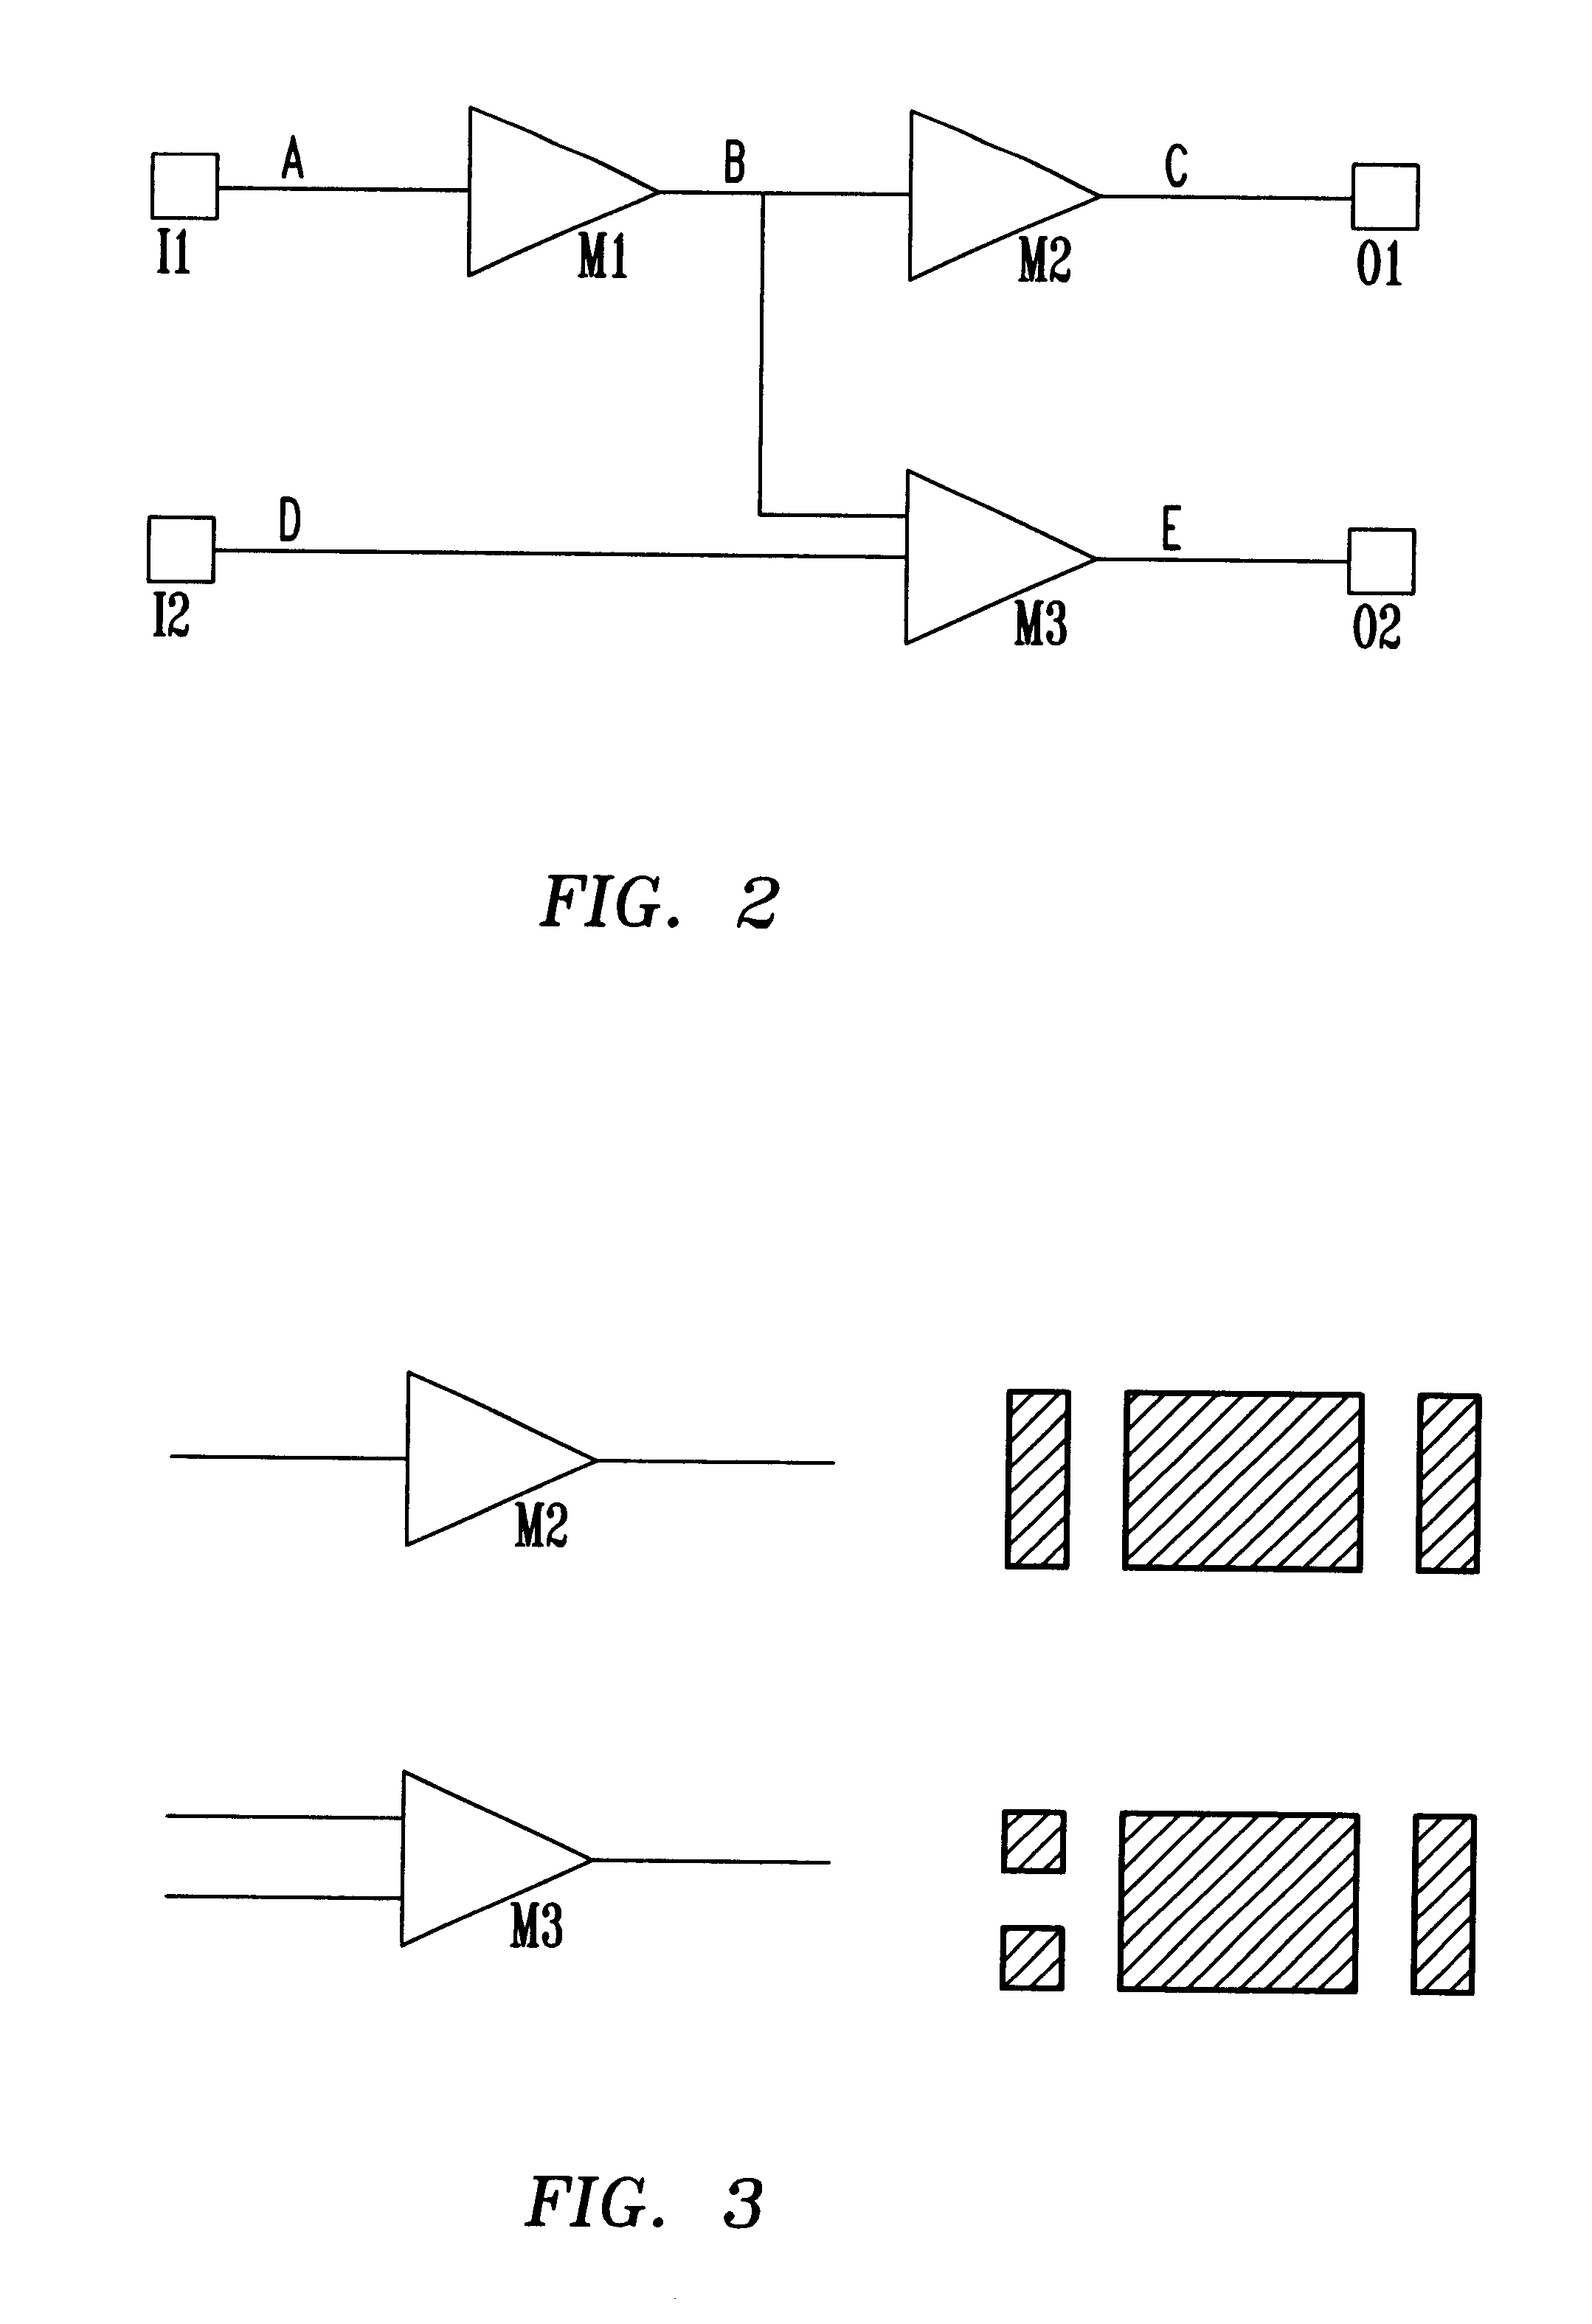 Method for improving wiring related yield and capacitance properties of integrated circuits by maze-routing